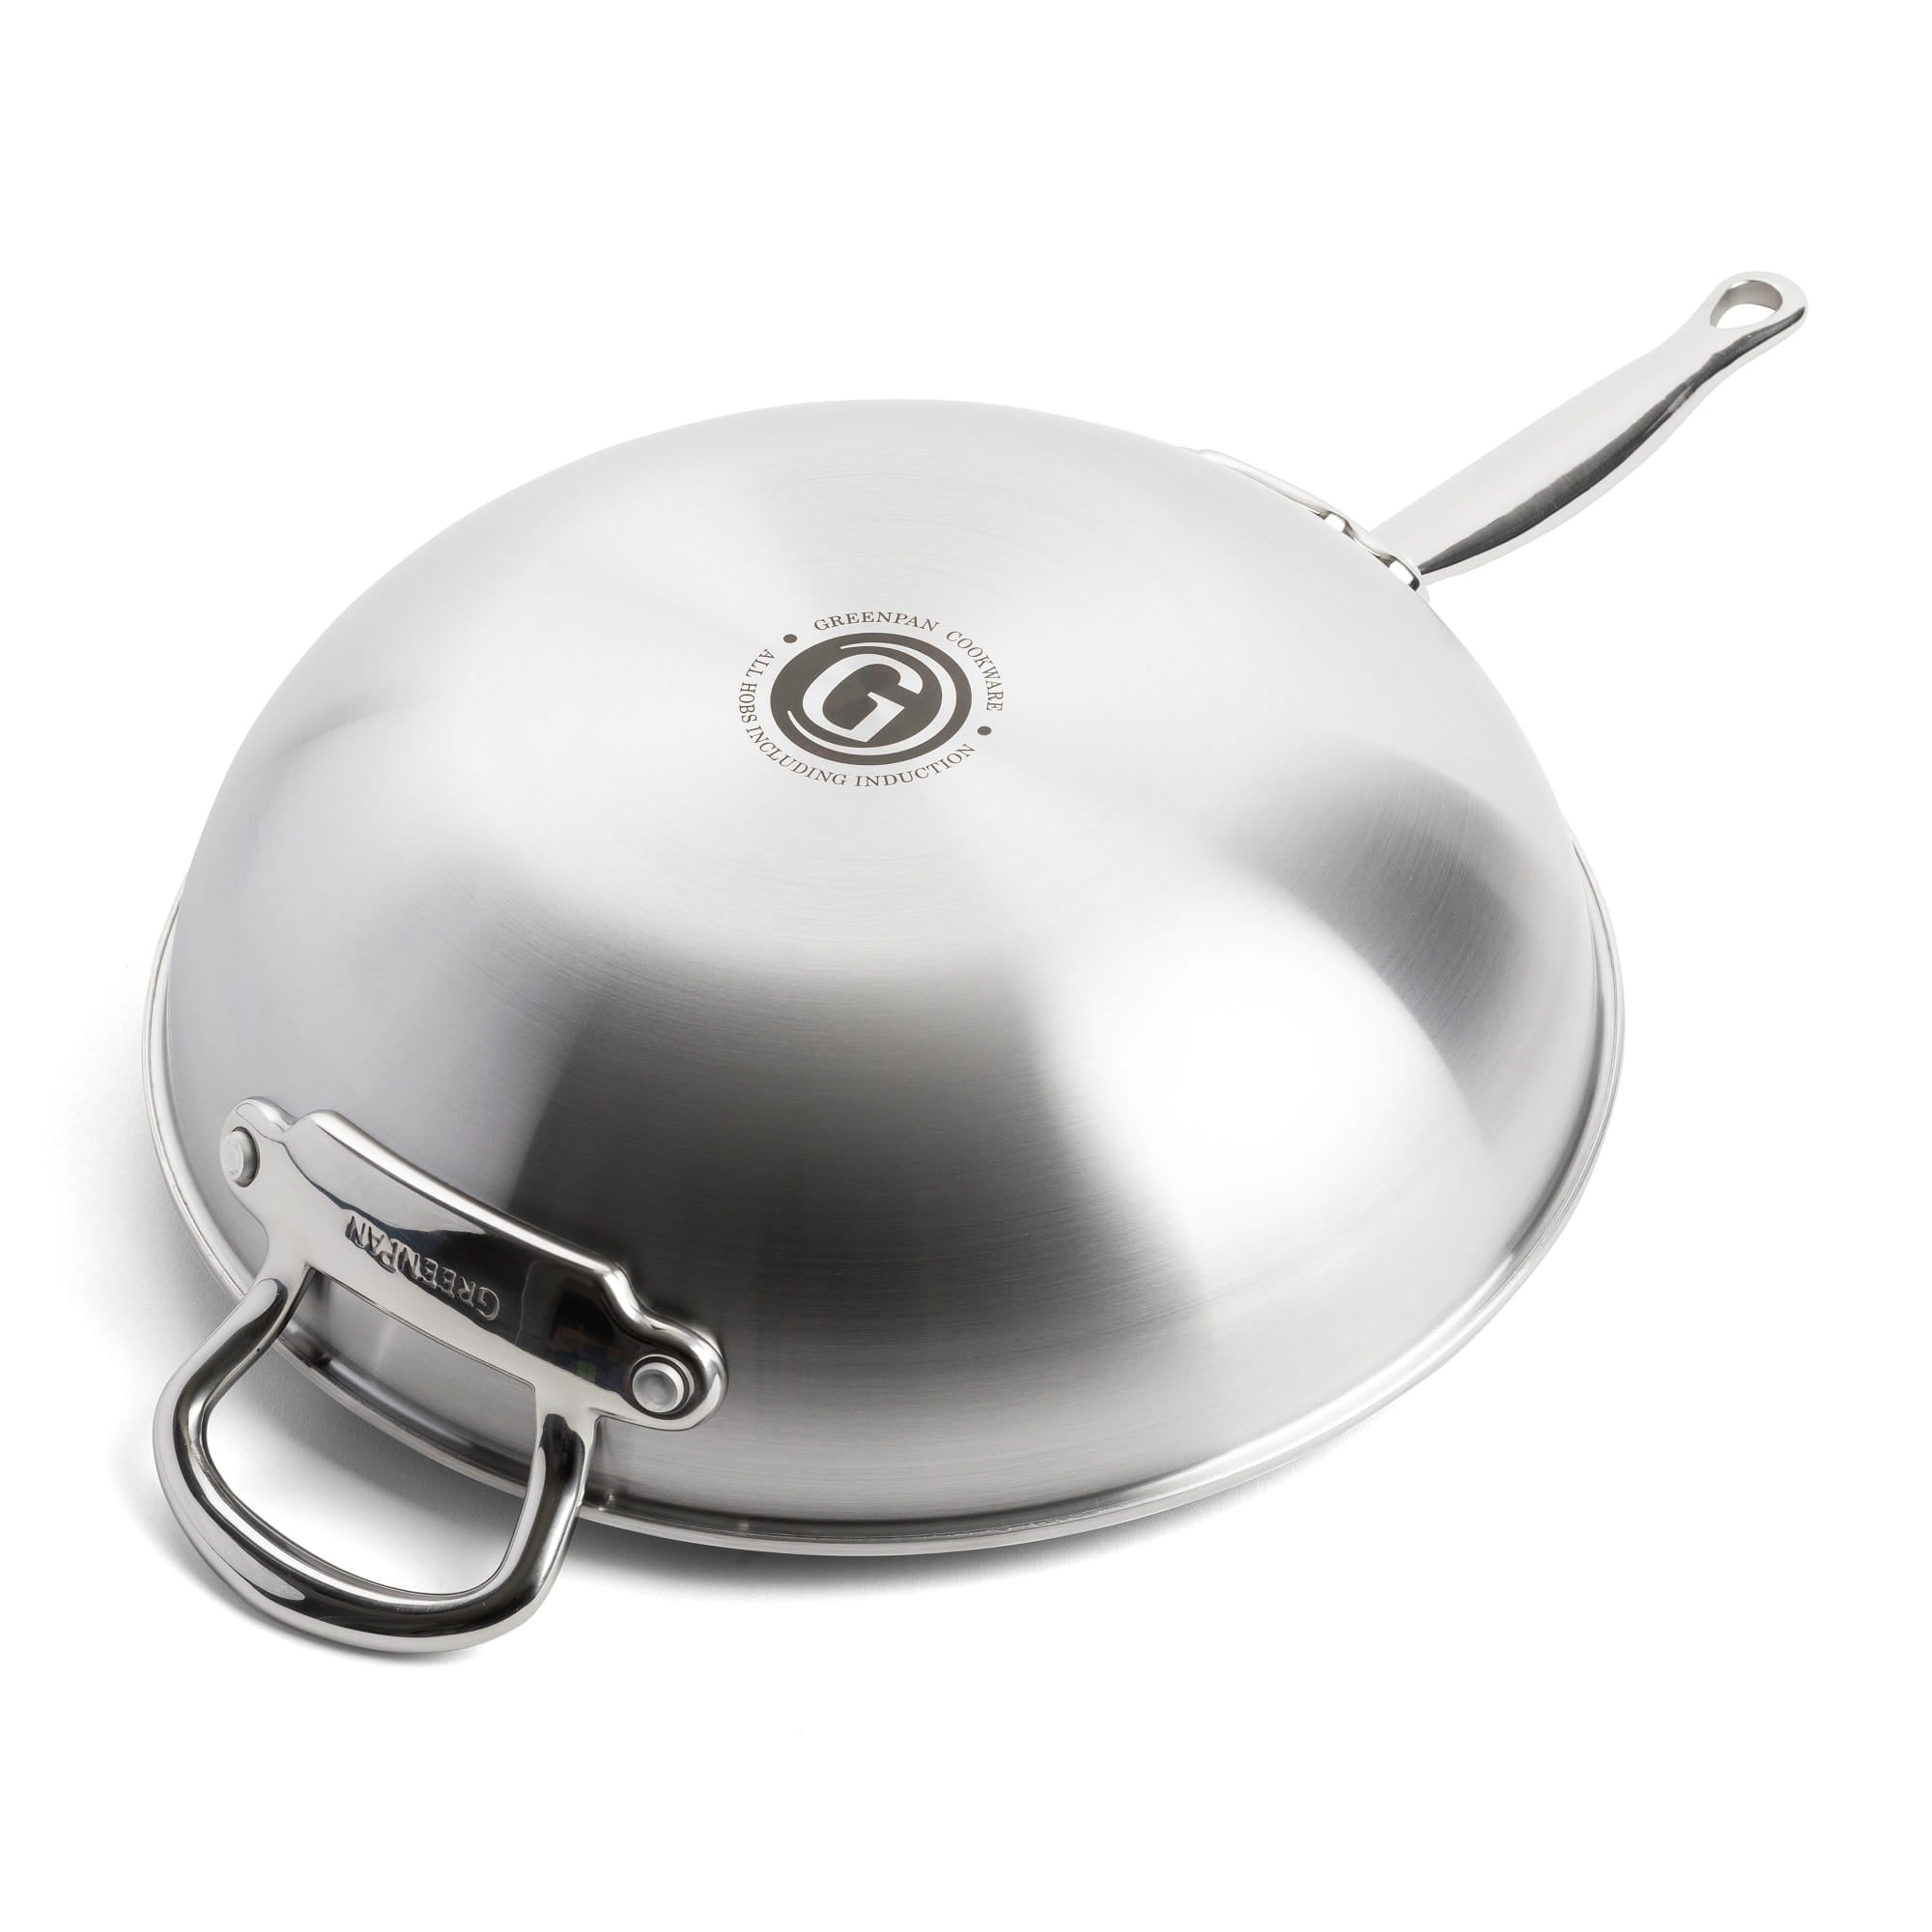 CC004413-001 - Premiere Wok with Lid, Stainless Steel - 30cm - Product Image 4